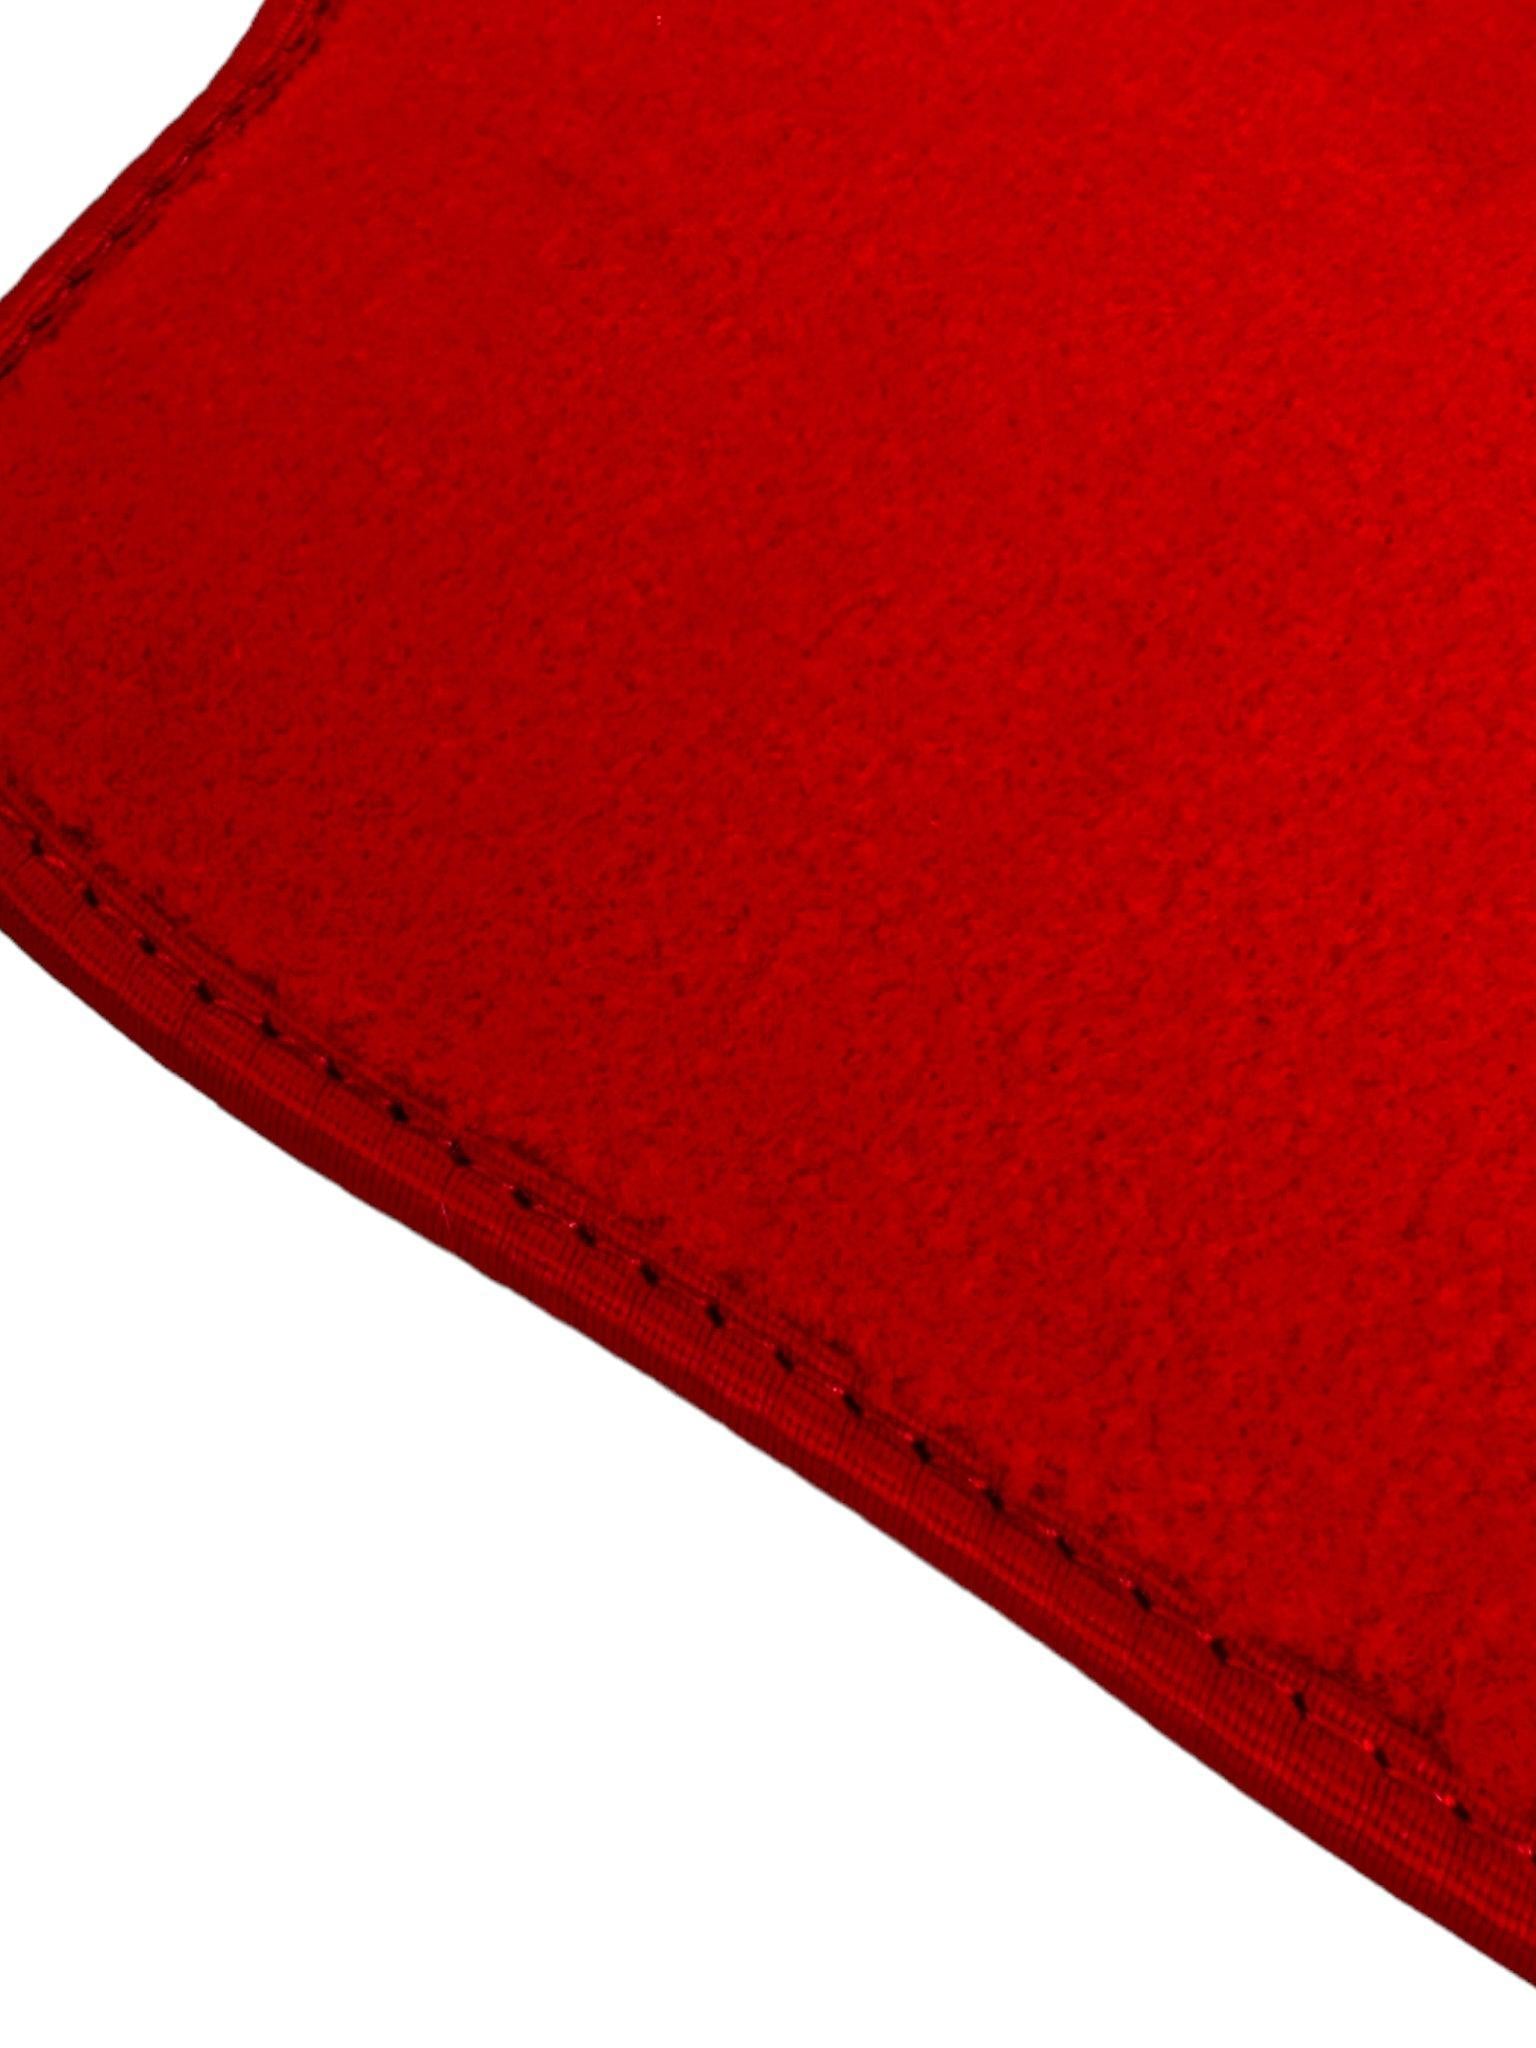 Red Floor Mats for BMW Z4 Series E86 Coupe (2003-2008) - AutoWin